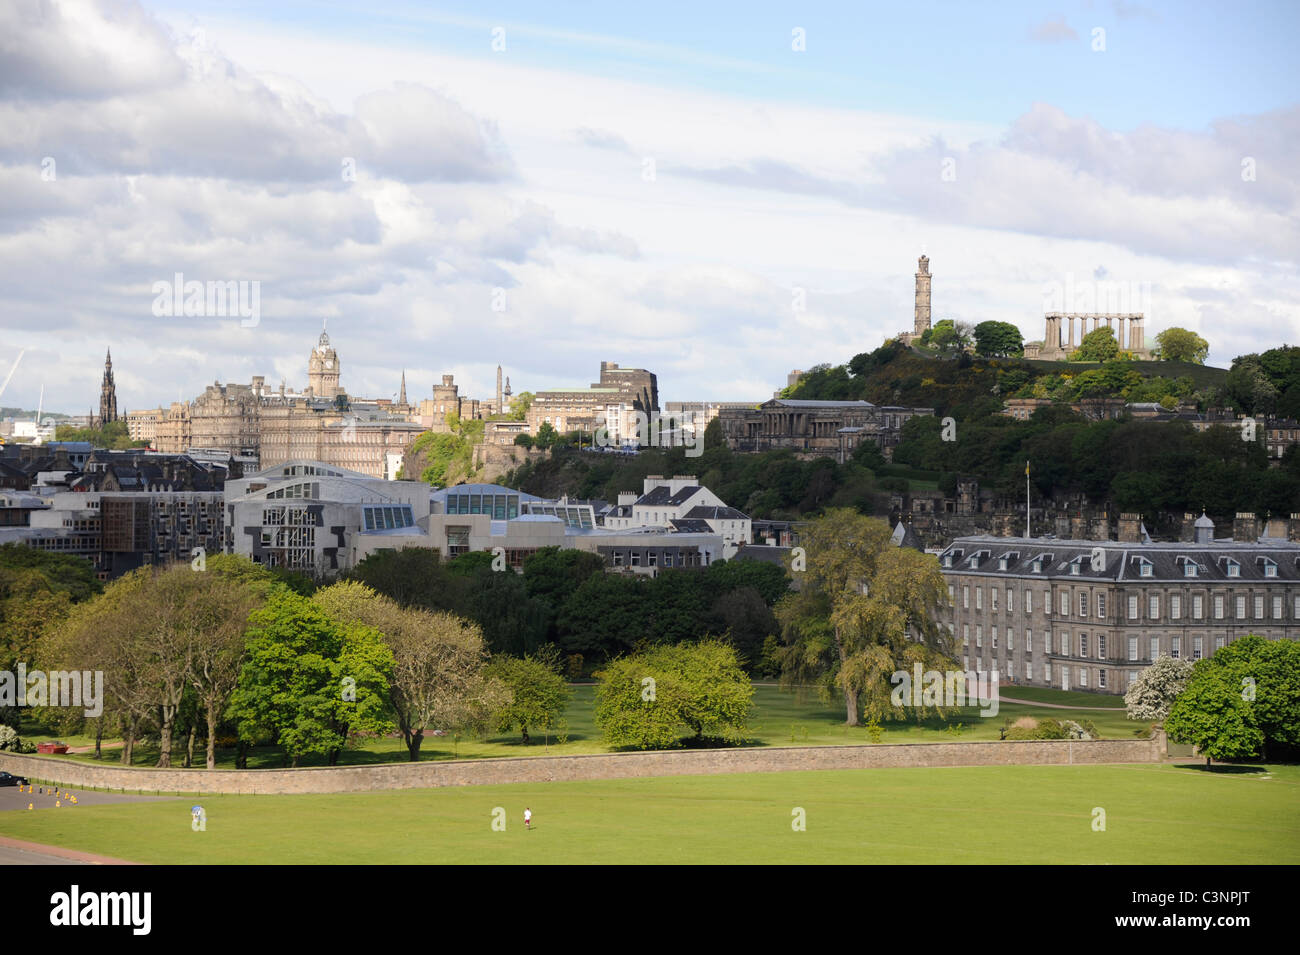 City of Edinburgh featuring the Scottish Parliament, Palace of Holyroodhouse and Calton Hill with Nelson's Monument on the top Stock Photo